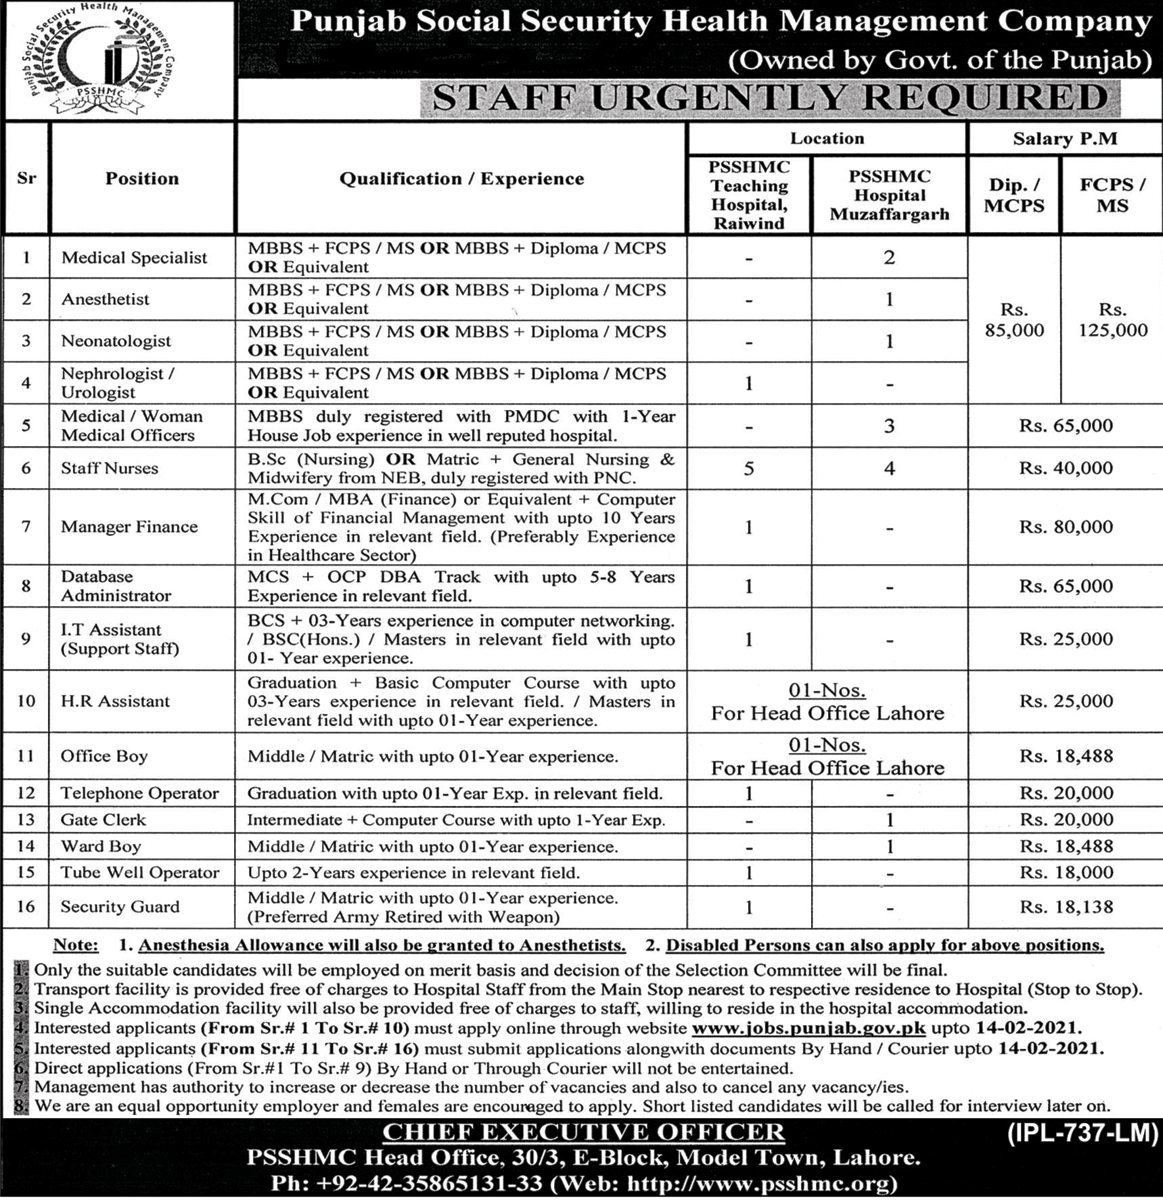 Jobs in Punjab Social Security Health Management Company